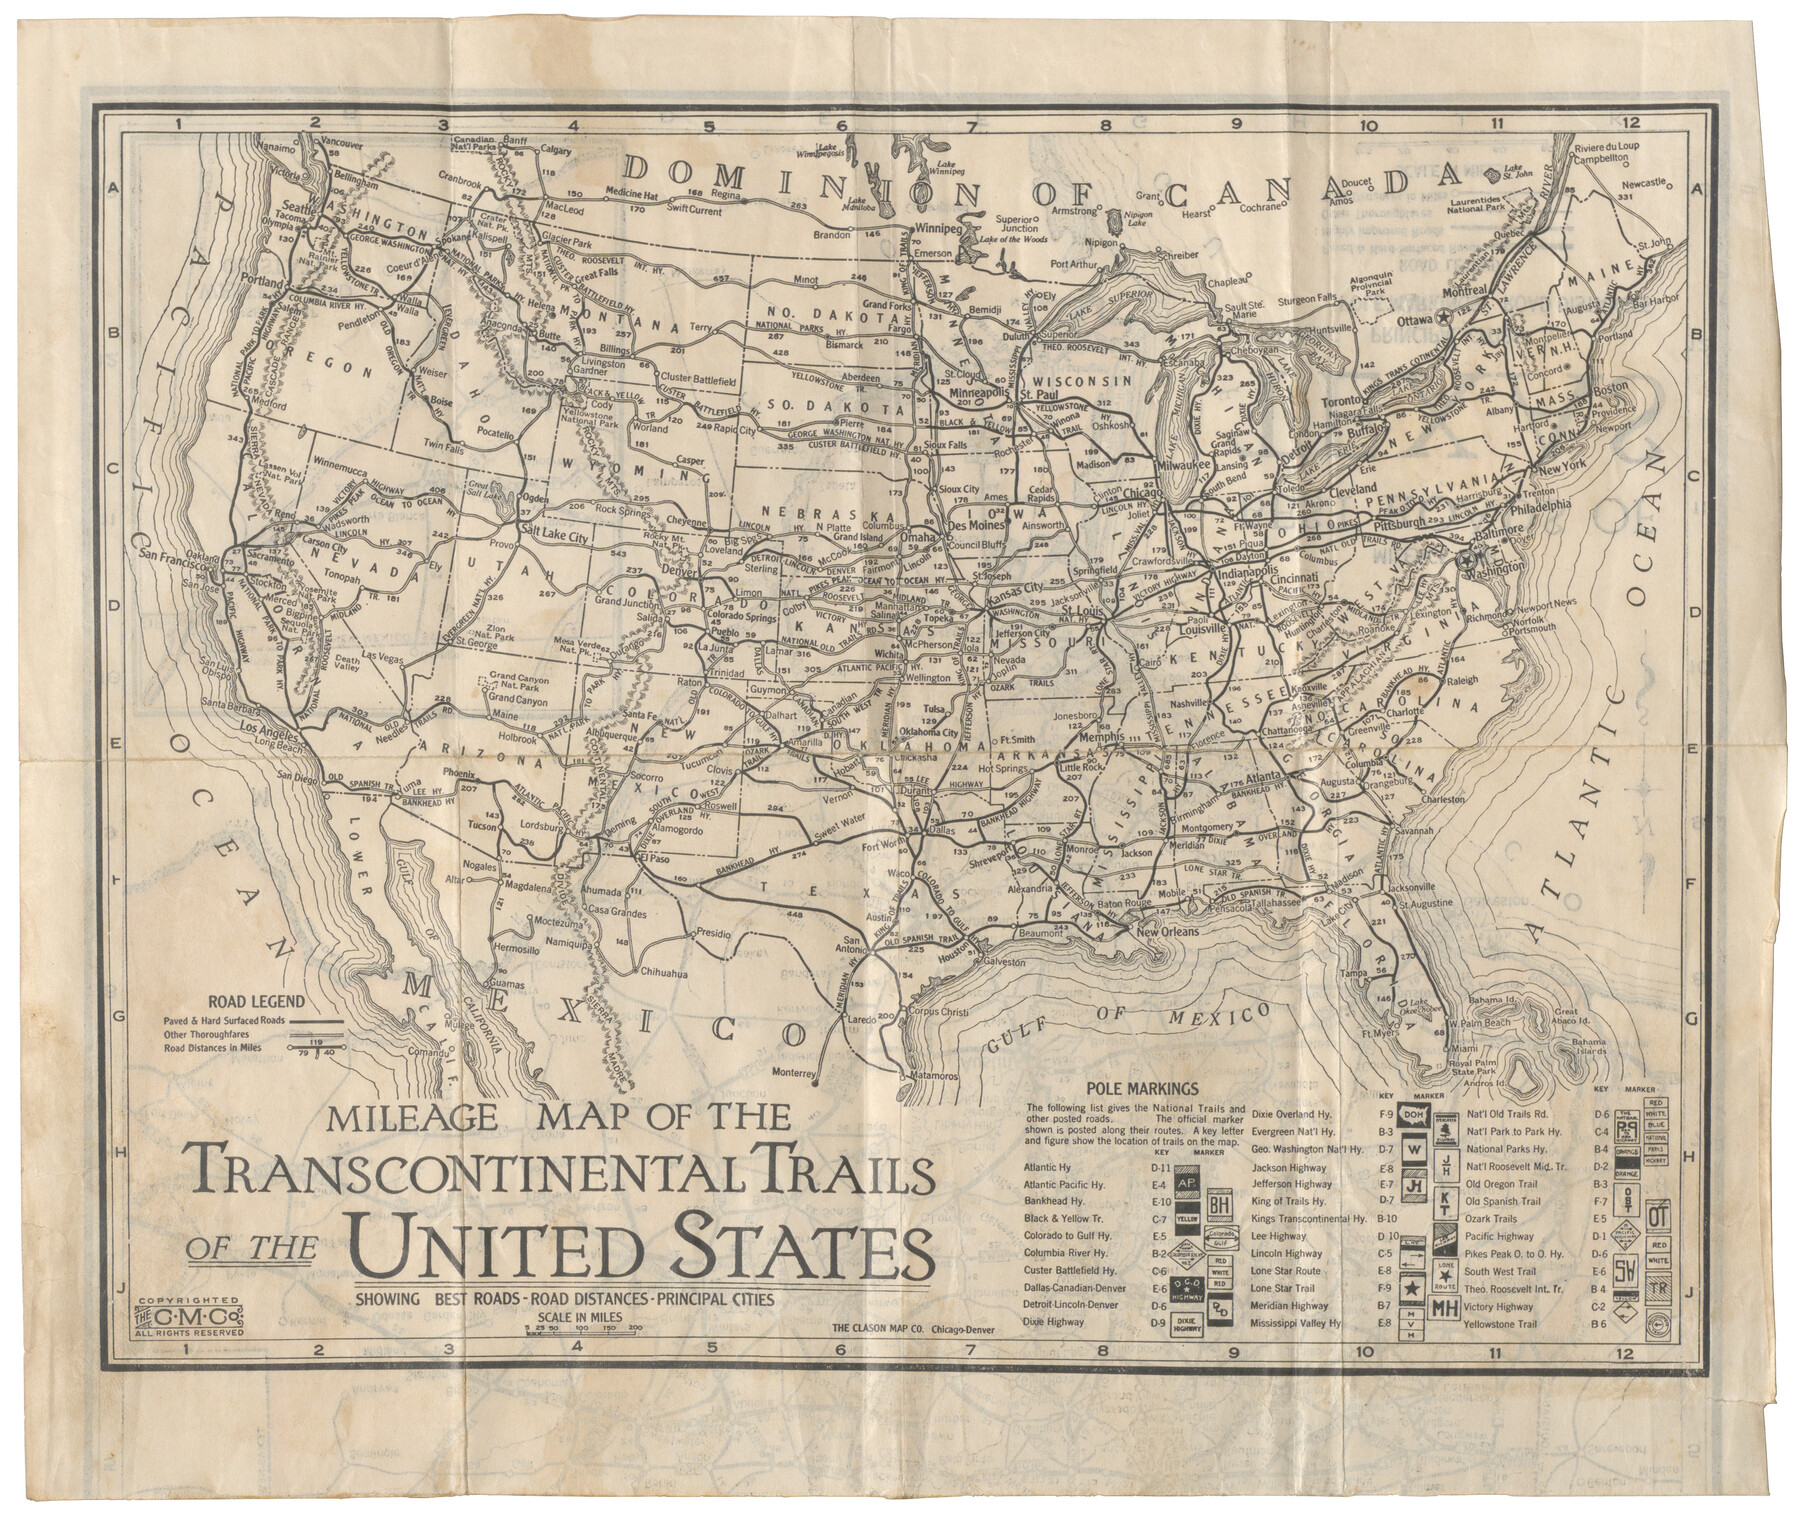 95899, Mileage Map of the Transcontinental Trails of the United States showing best roads, road distances, principal cities, Cobb Digital Map Collection - 1